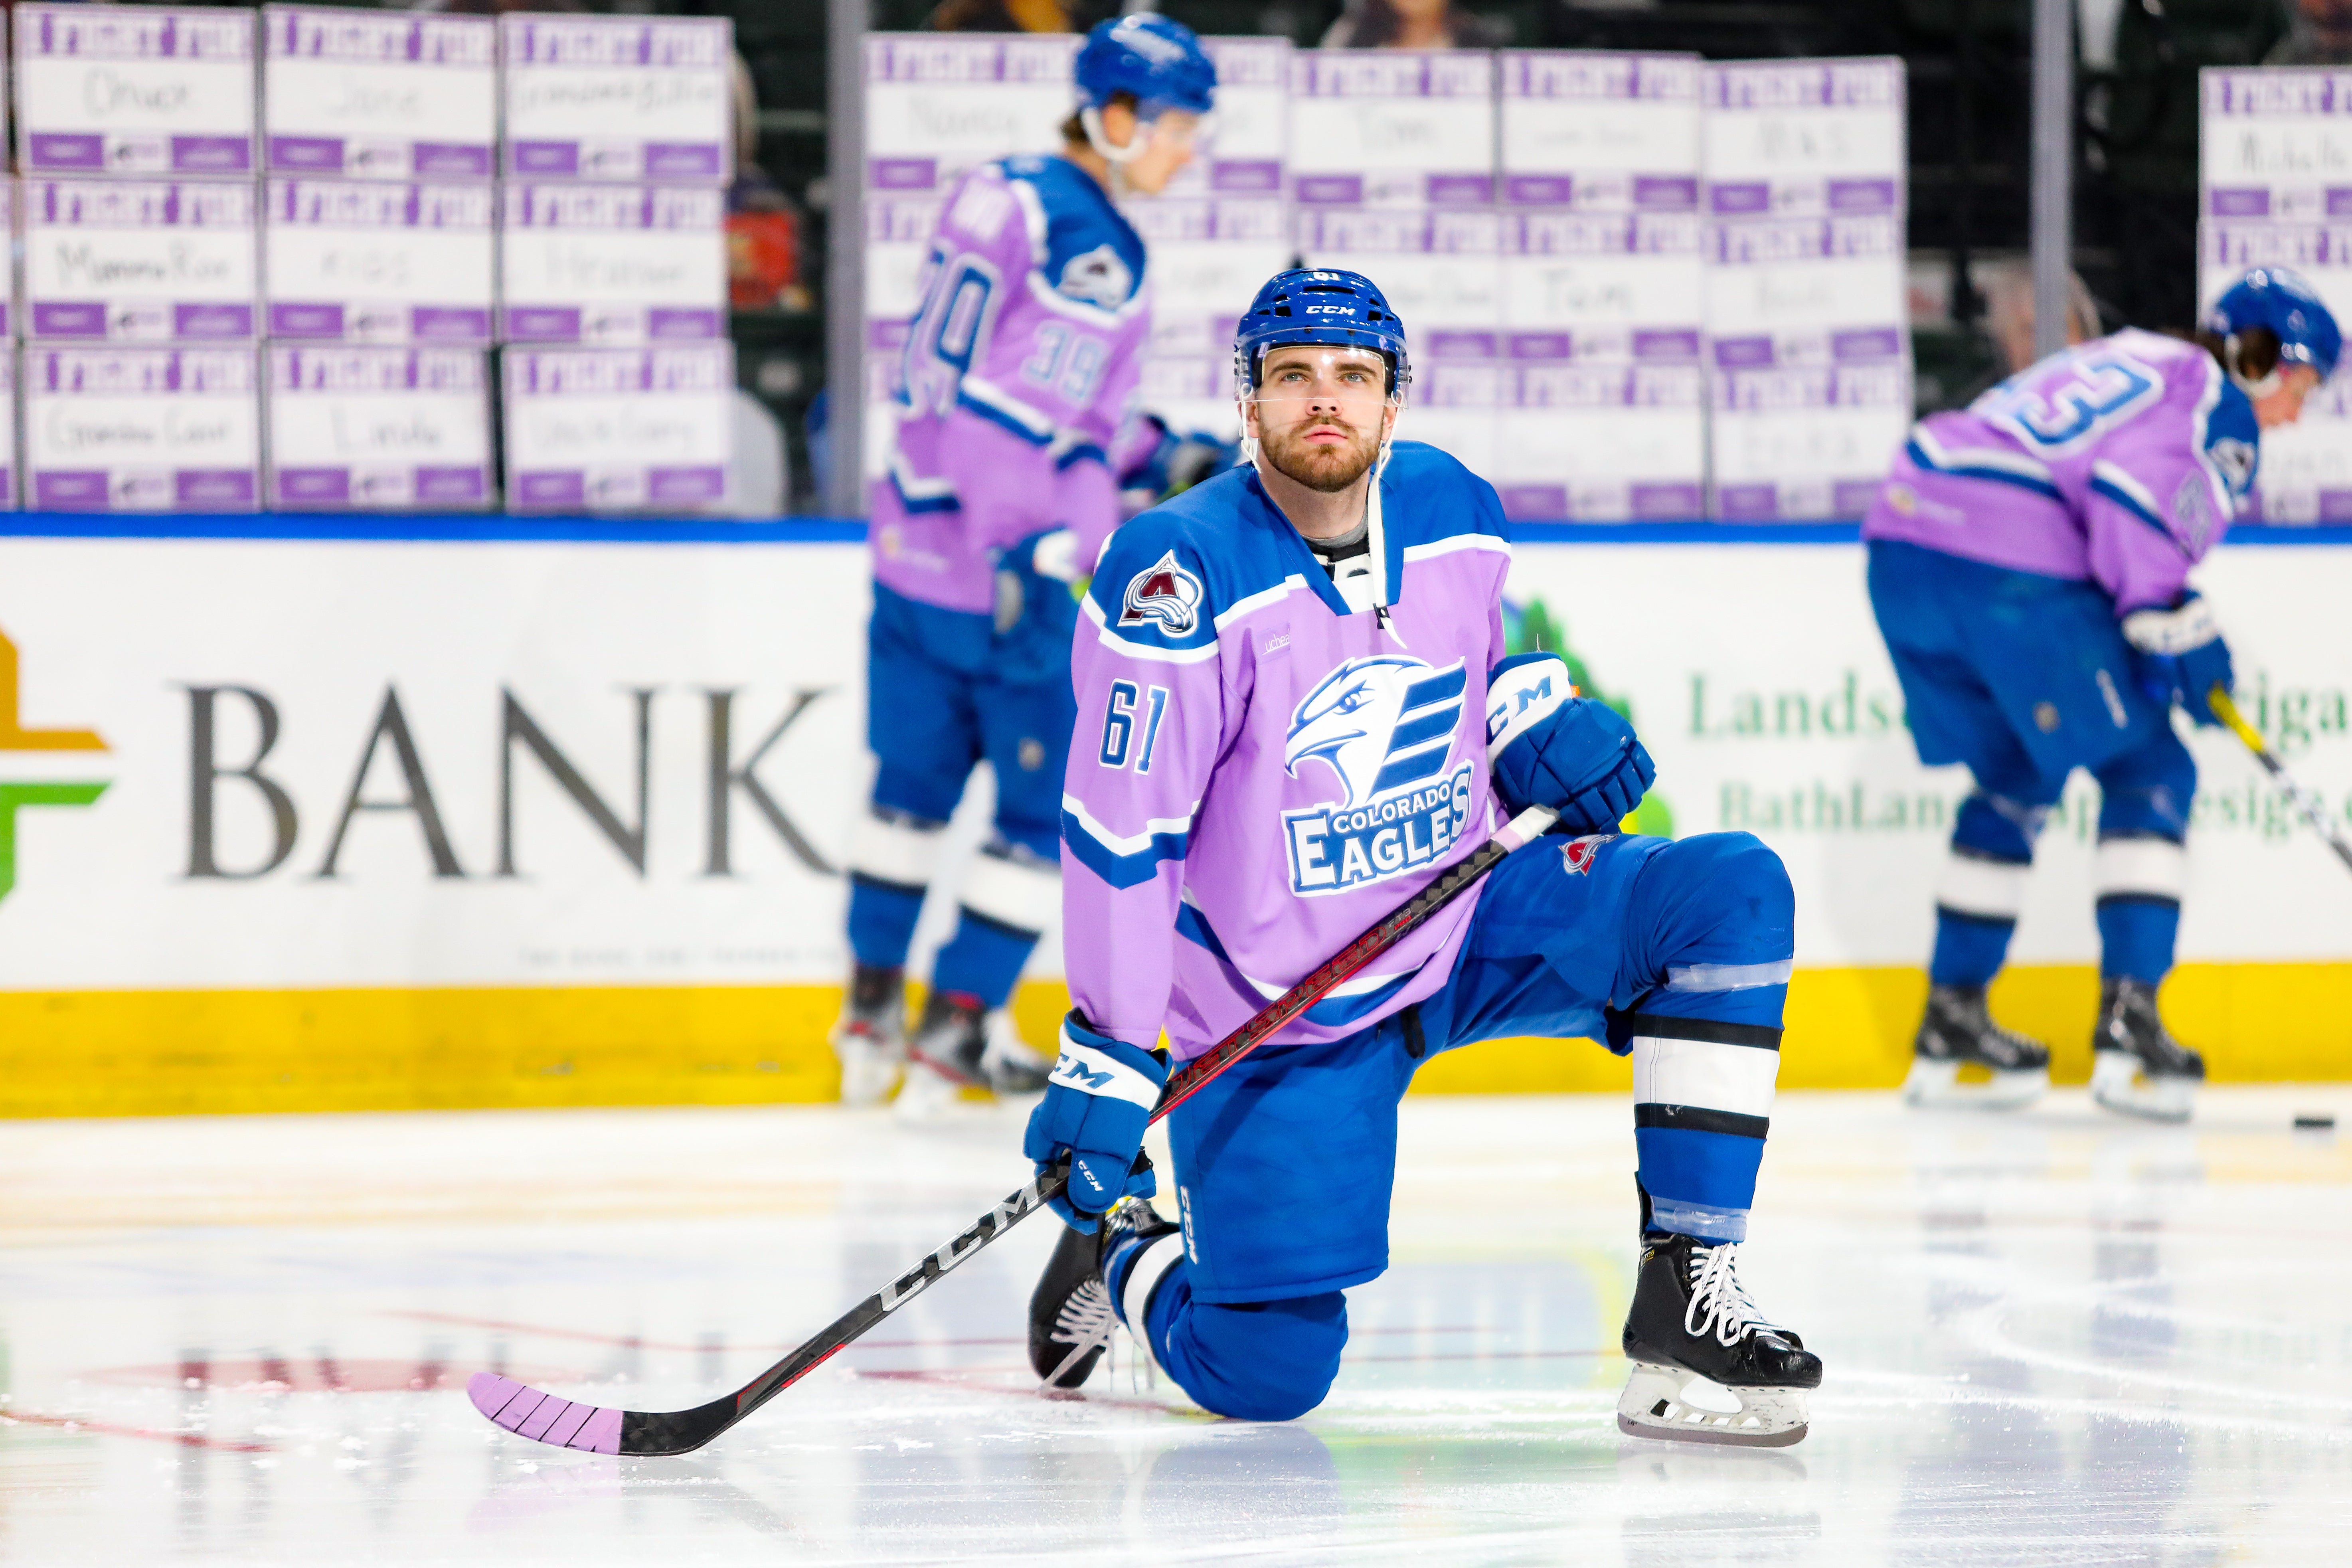 Hockey Fights Cancer warm up jerseys hang in the Colorado